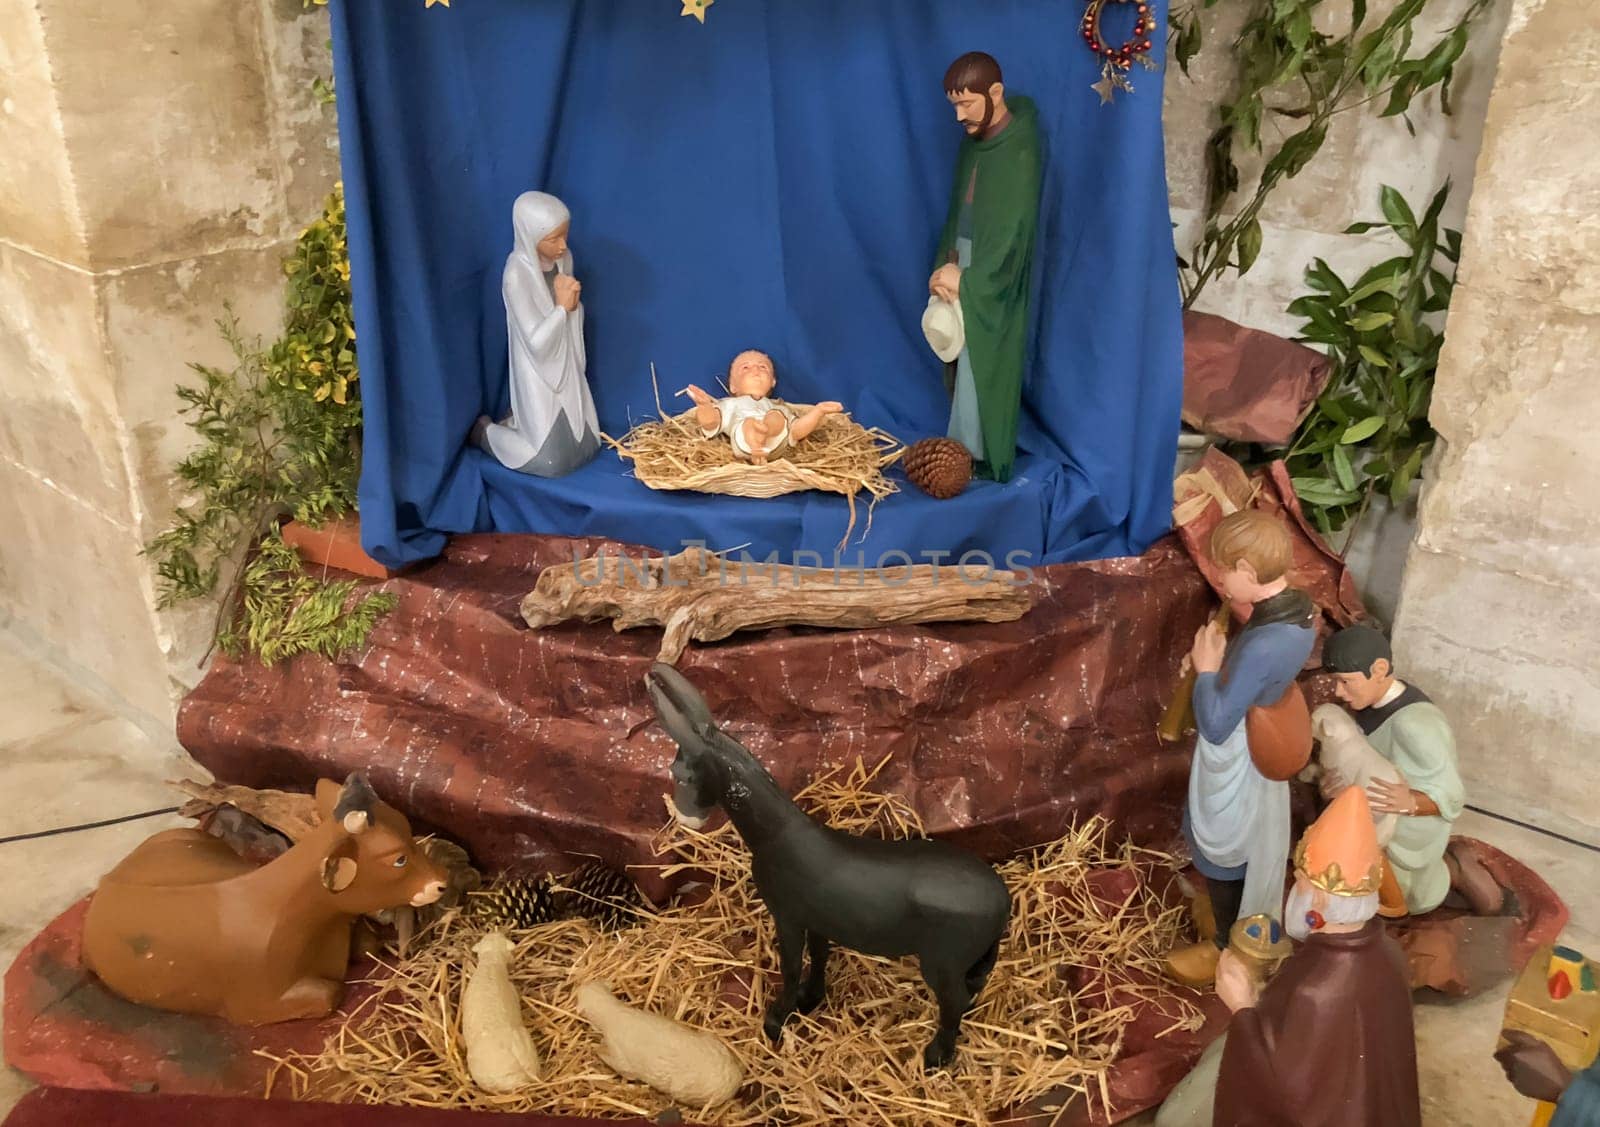 Scene of christmas creche with Joseph Mary and small Jesus